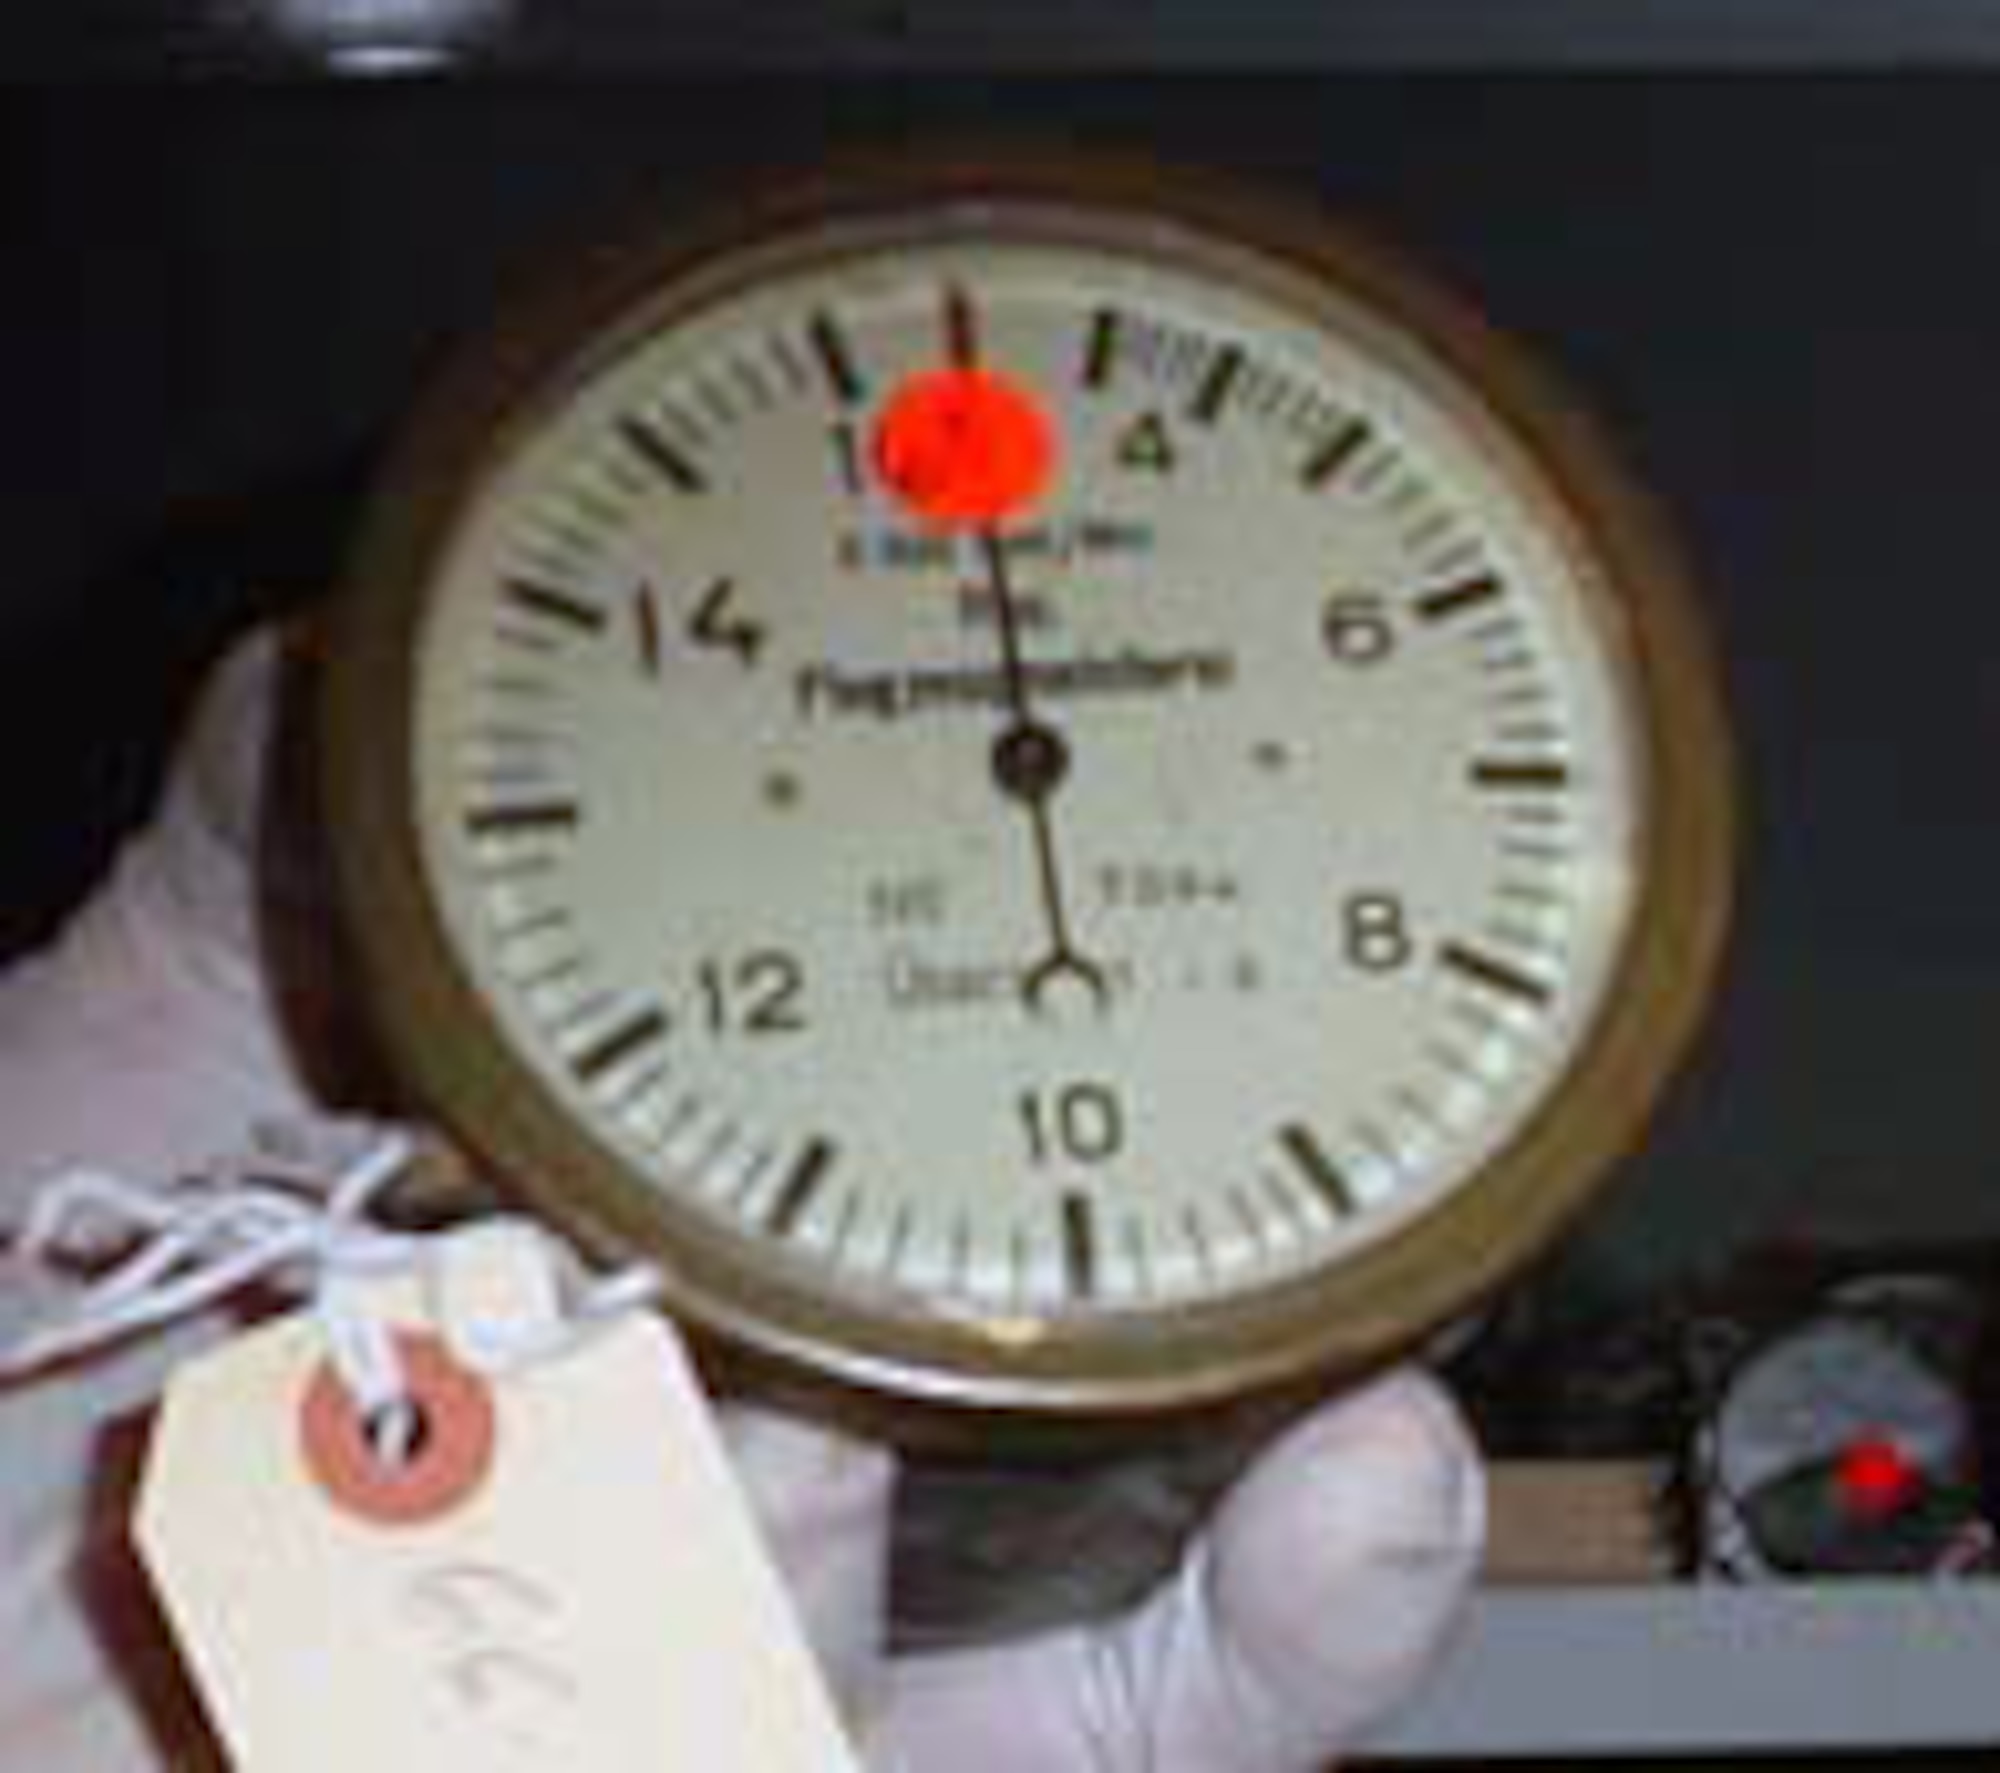 This tachometer is part of the museum's Eddie Rickenbacker collection. (U.S. Air Force photo)